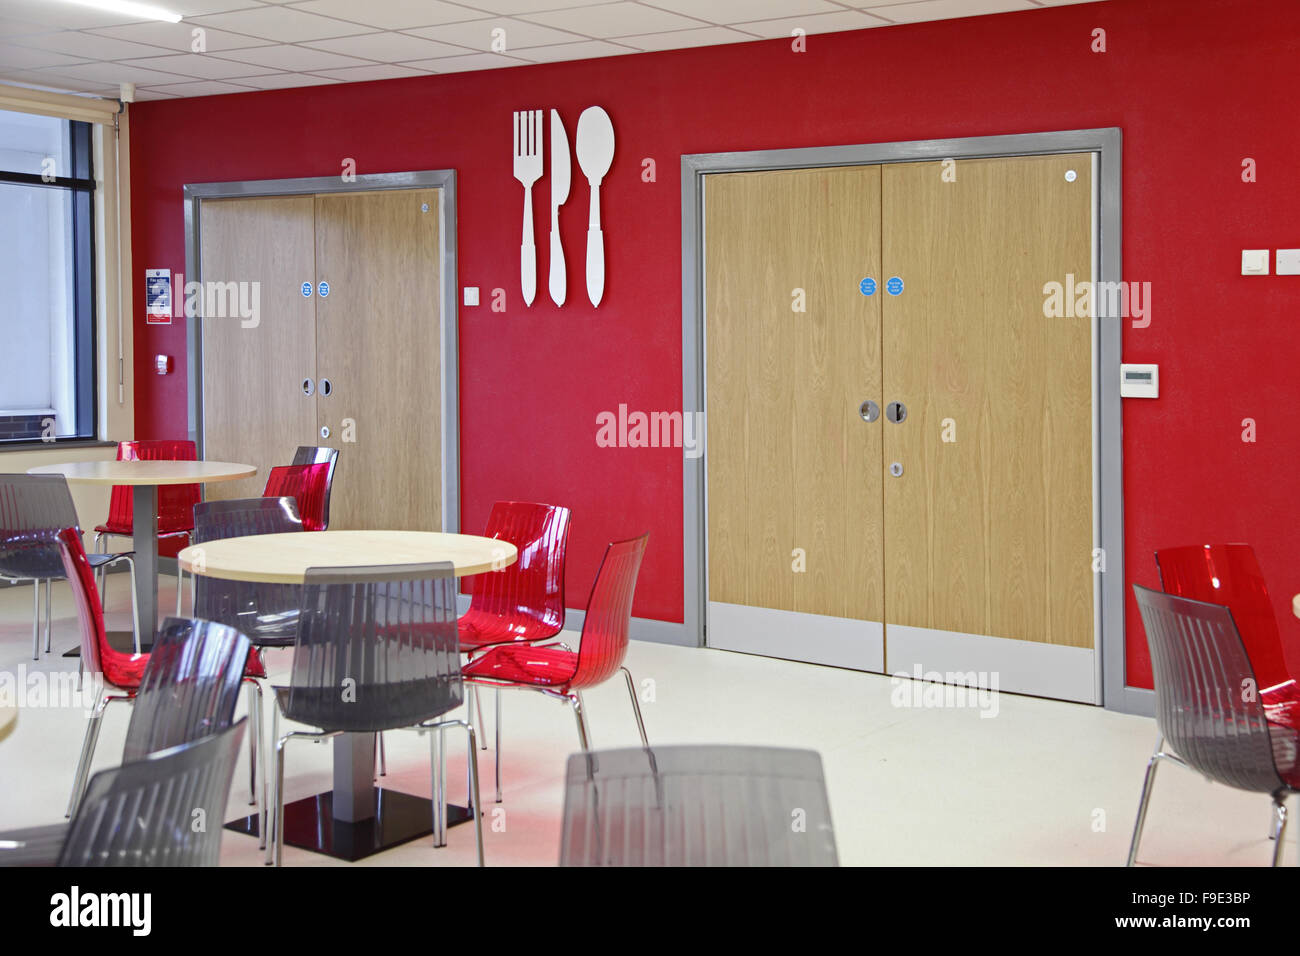 restaurant area in a new academy school featuring a red and grey colour scheme with large knife and fork symbols mounted on wall Stock Photo